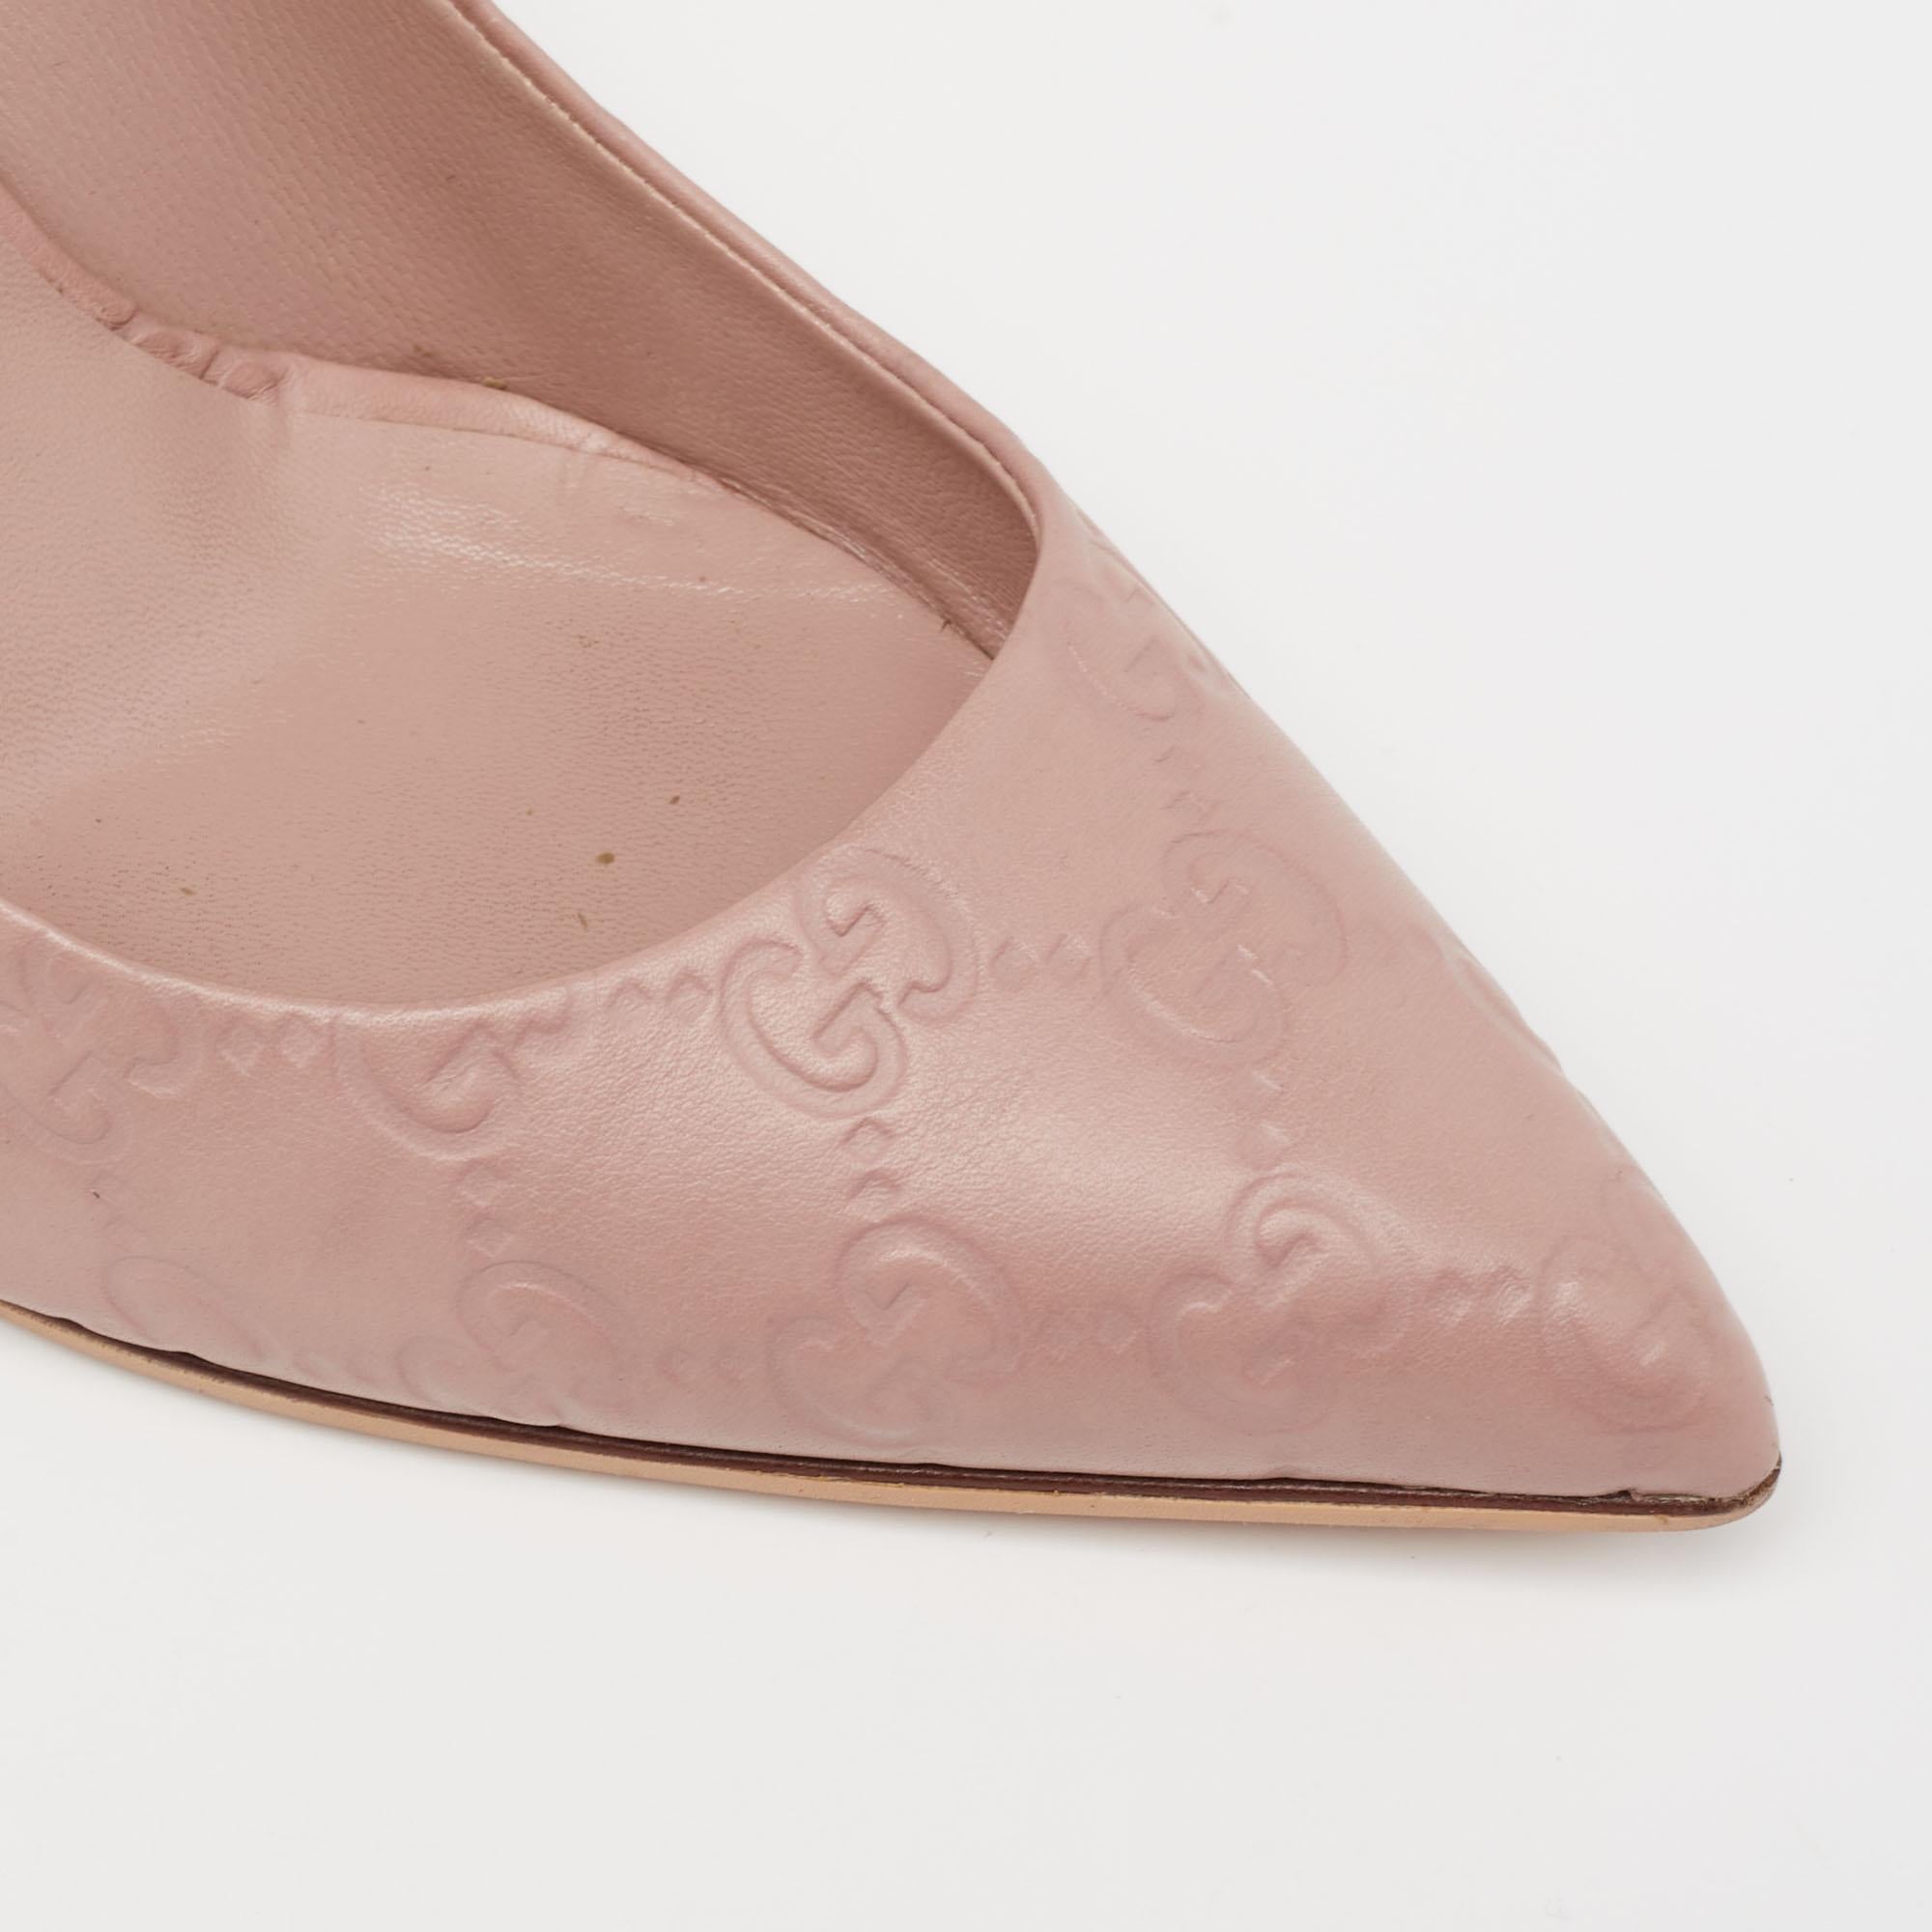 Gucci Dusty Pink Guccissima Leather Horsebit Kristen Bamboo Heel Pumps Size 39 1